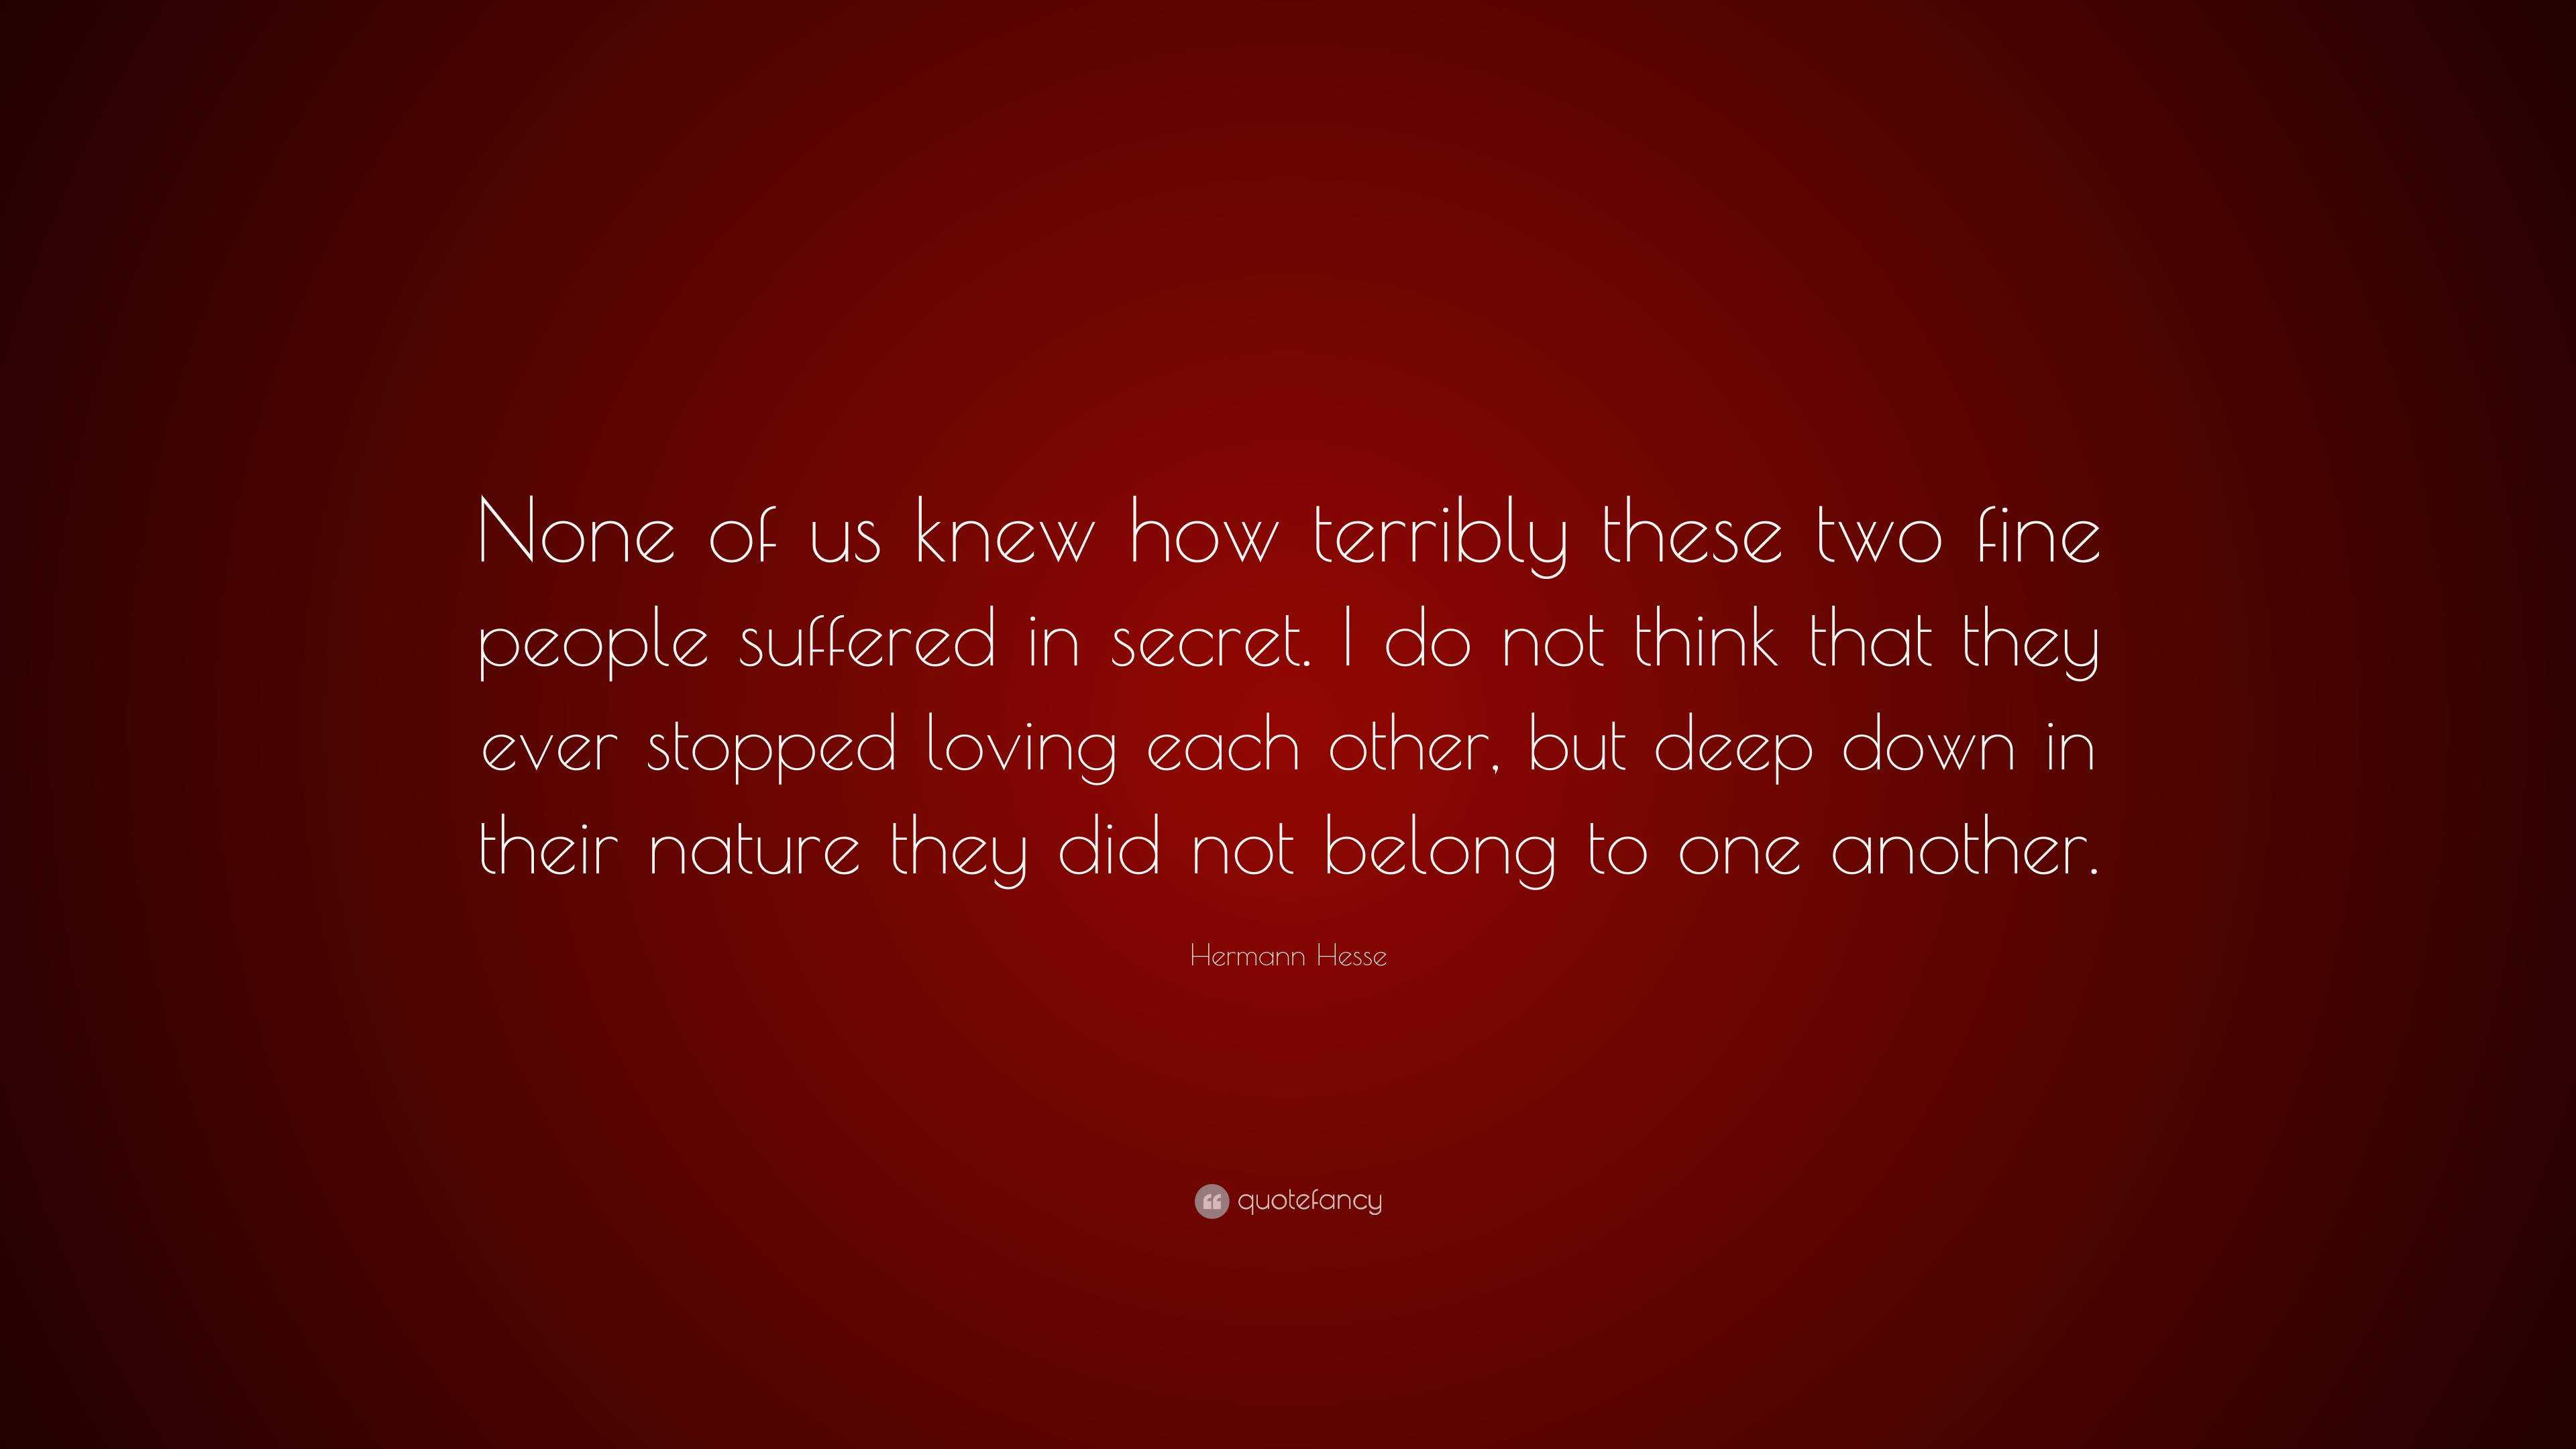 Hermann Hesse Quote None Of Us Knew How Terribly These Two Fine People Suffered In Secret I Do Not Think That They Ever Stopped Loving Each